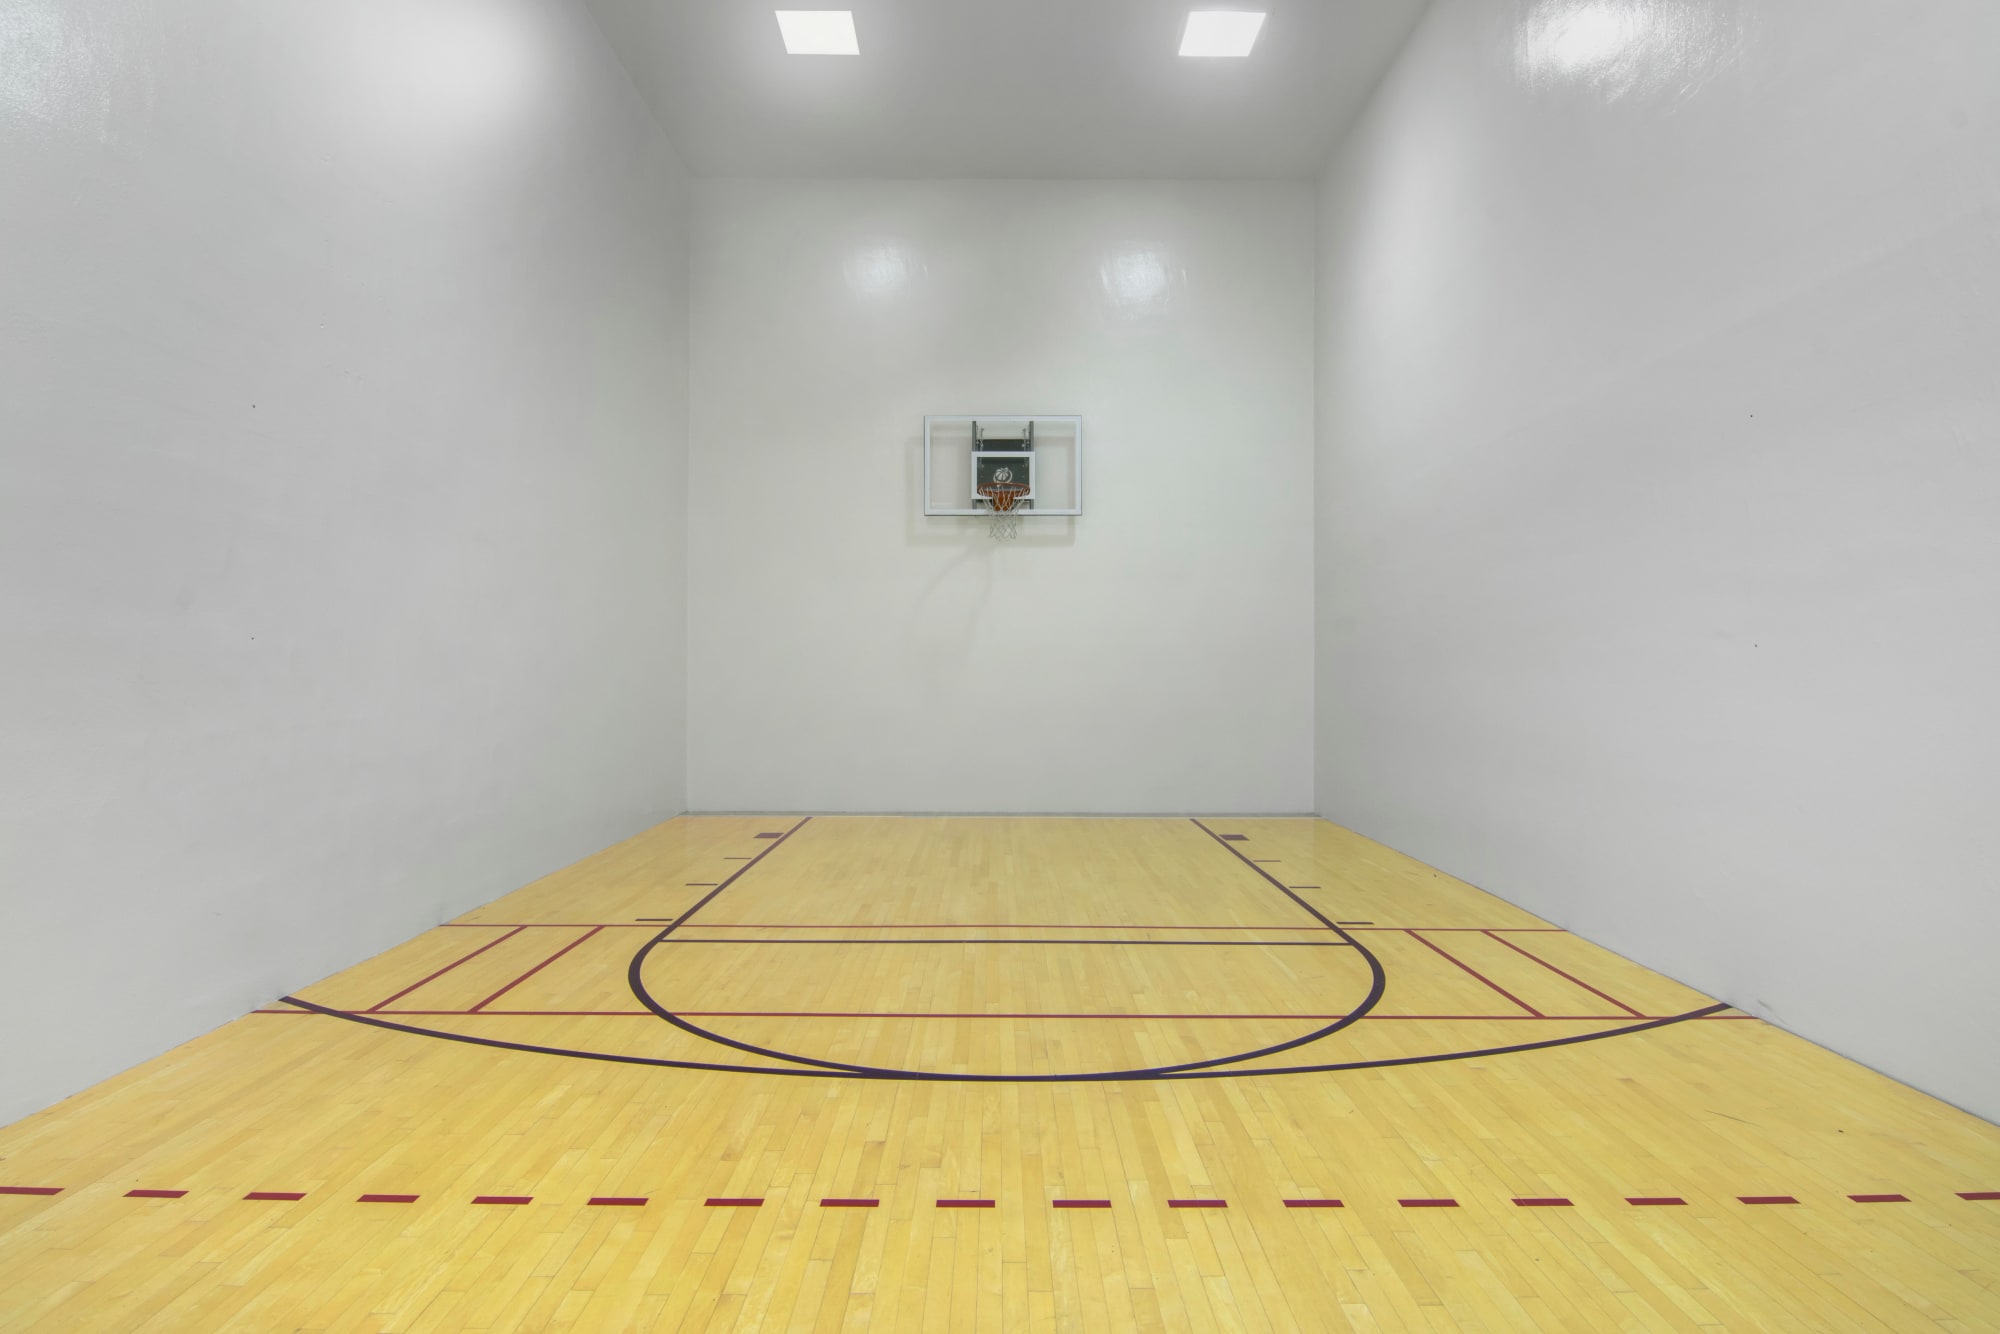 Indoor basketball court at Autumn Chase Apartments in Vancouver, Washington